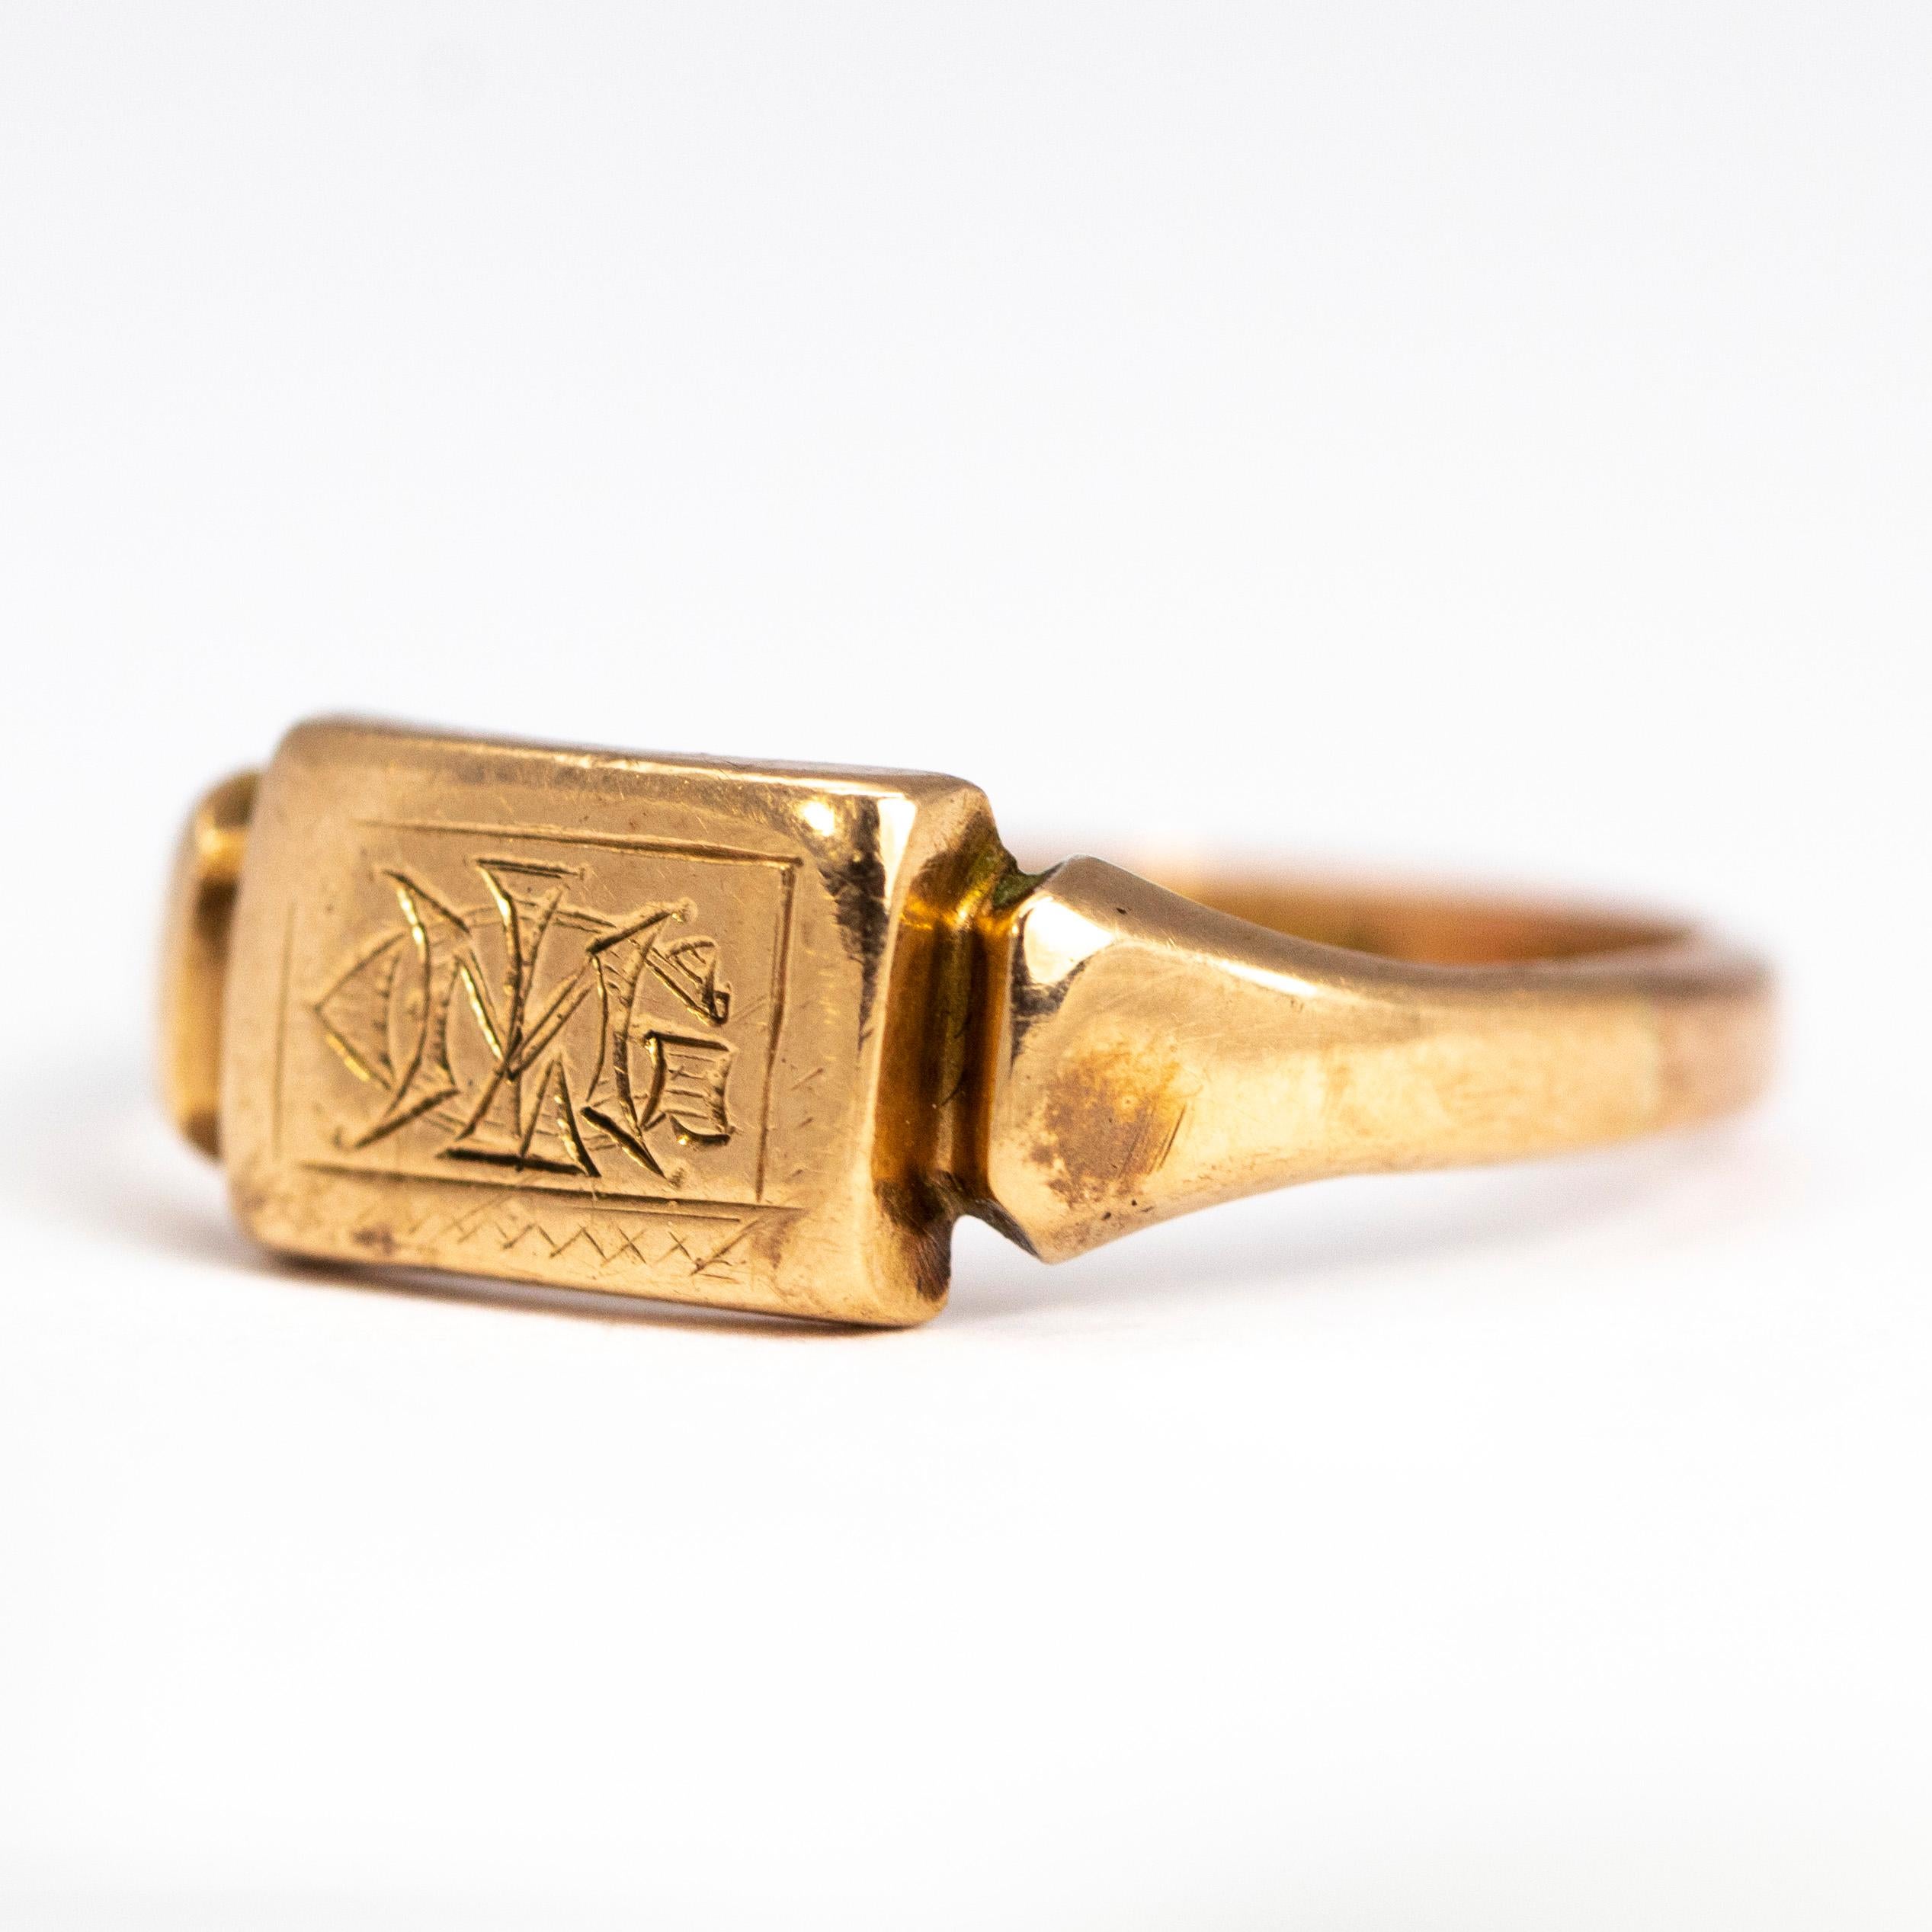 The glossy gold band is modelled in 9ct gold and has the initials L.M.G engraved into the front. 

Ring Size: Q or 8
Band Width: 6.5mm

Weight: 2.53grams 